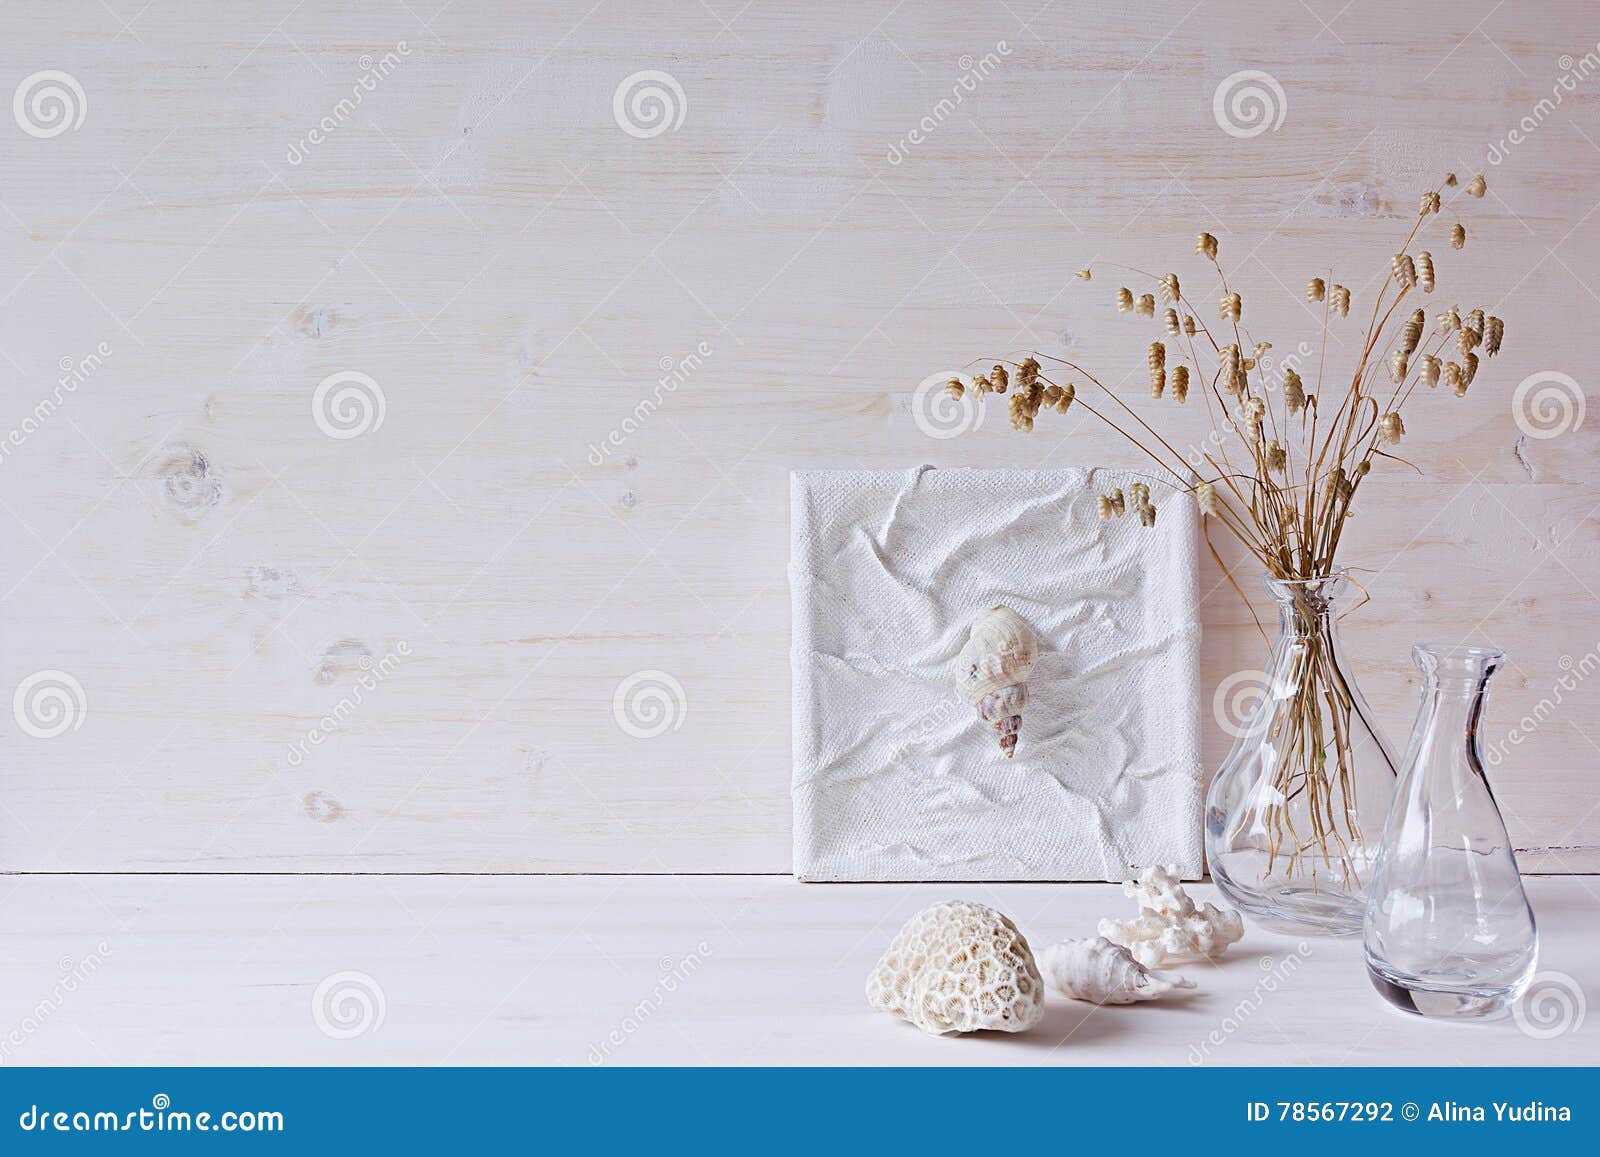 soft home decor. seashells and glass vase with spikelets on white wood background.